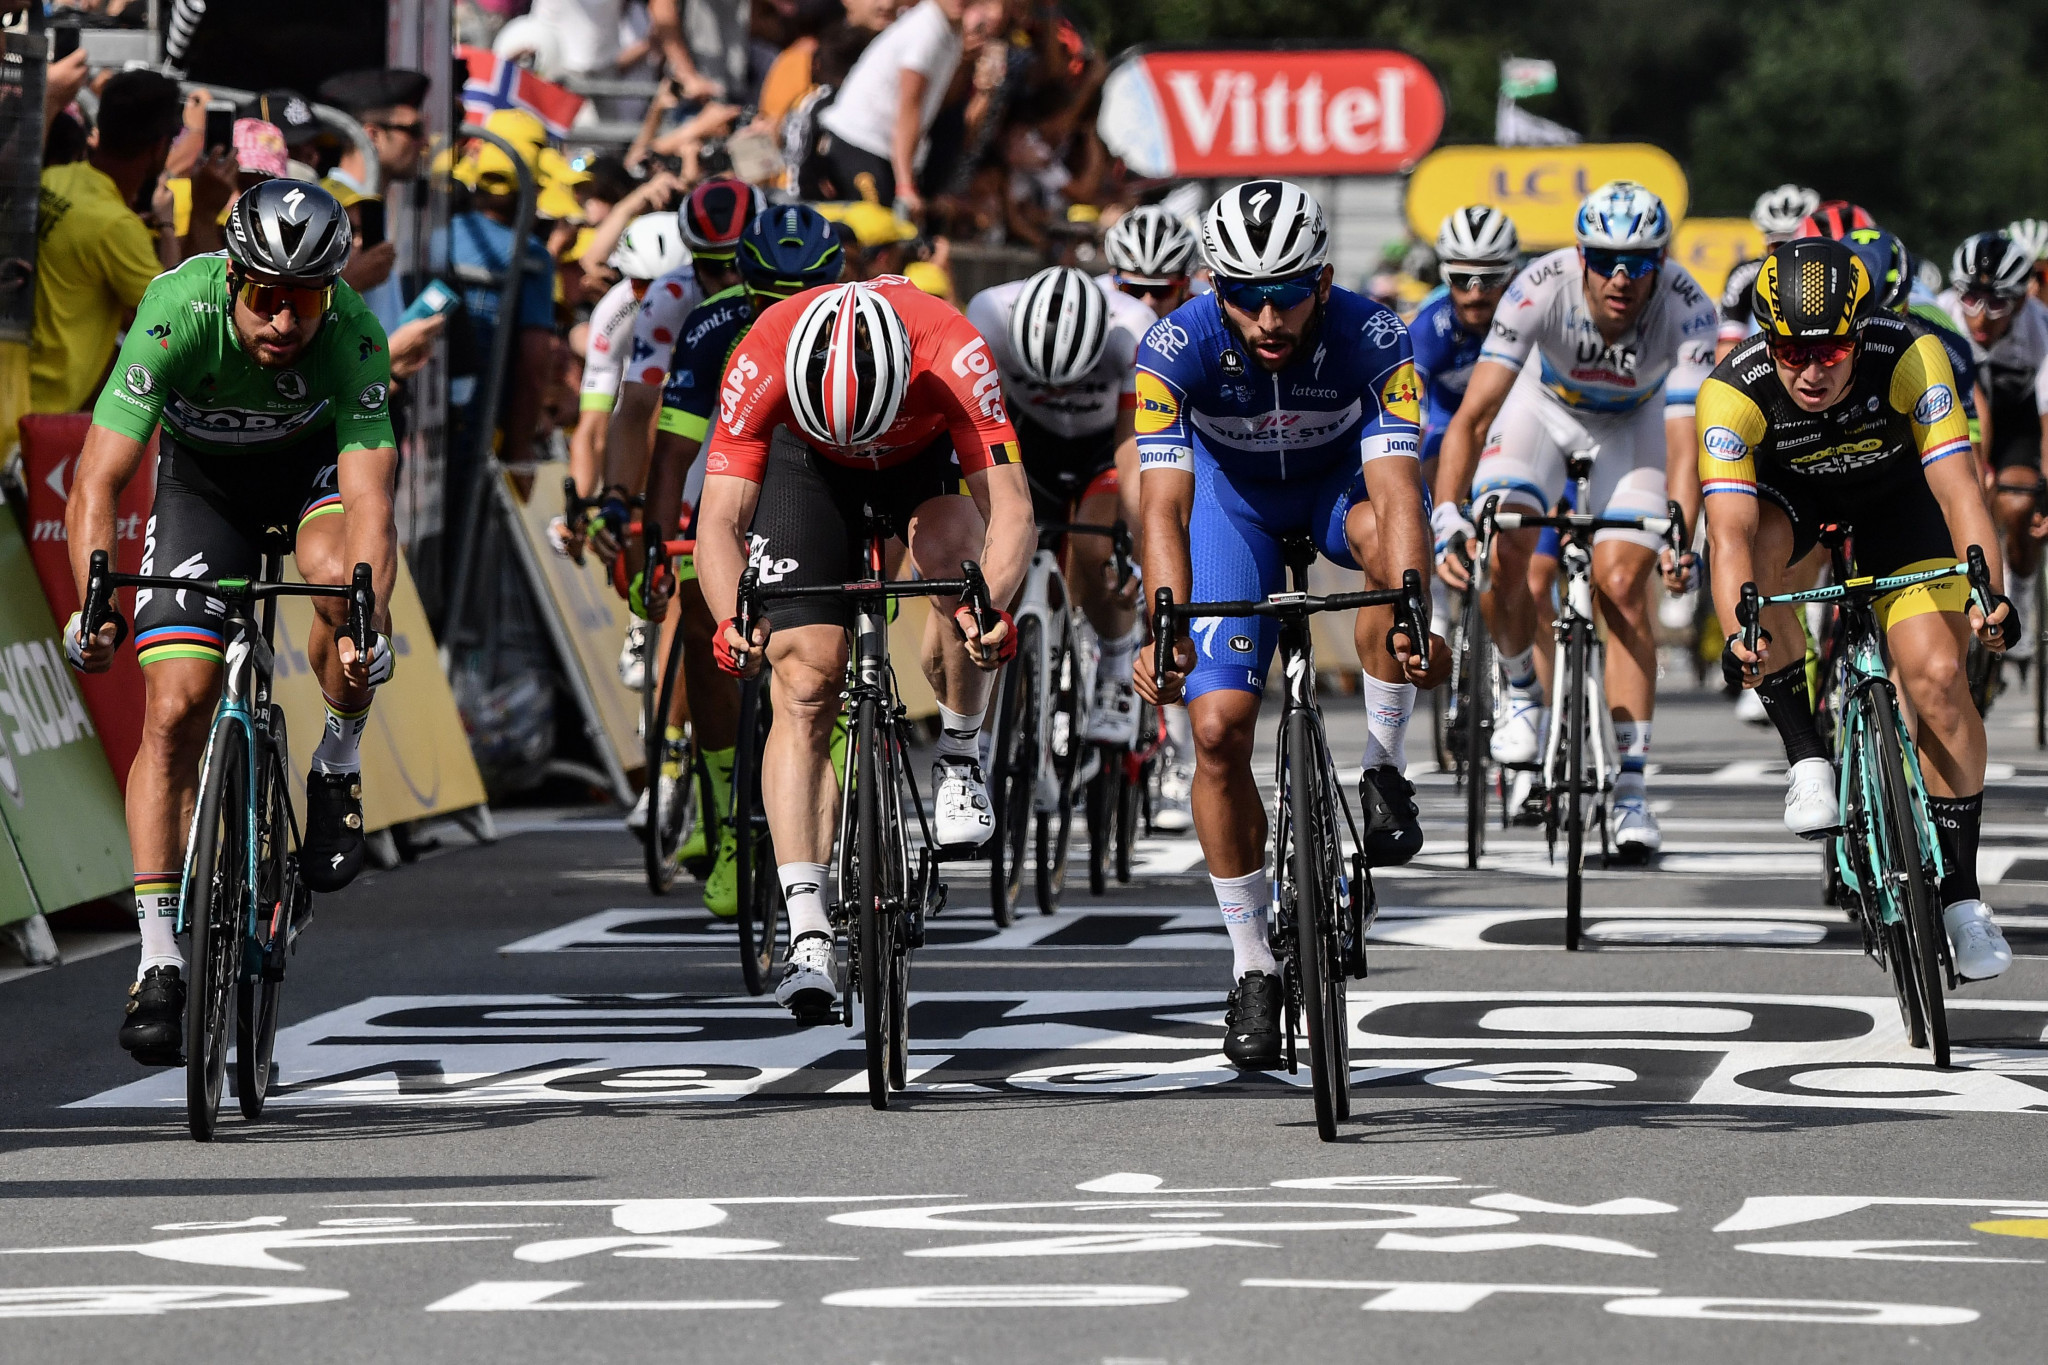 Colombia's Fernando Gaviria, centre right, underlined his sprinting prowess again today as he won his second stage of this year's Tour de France in Sarzeau ©Getty Images